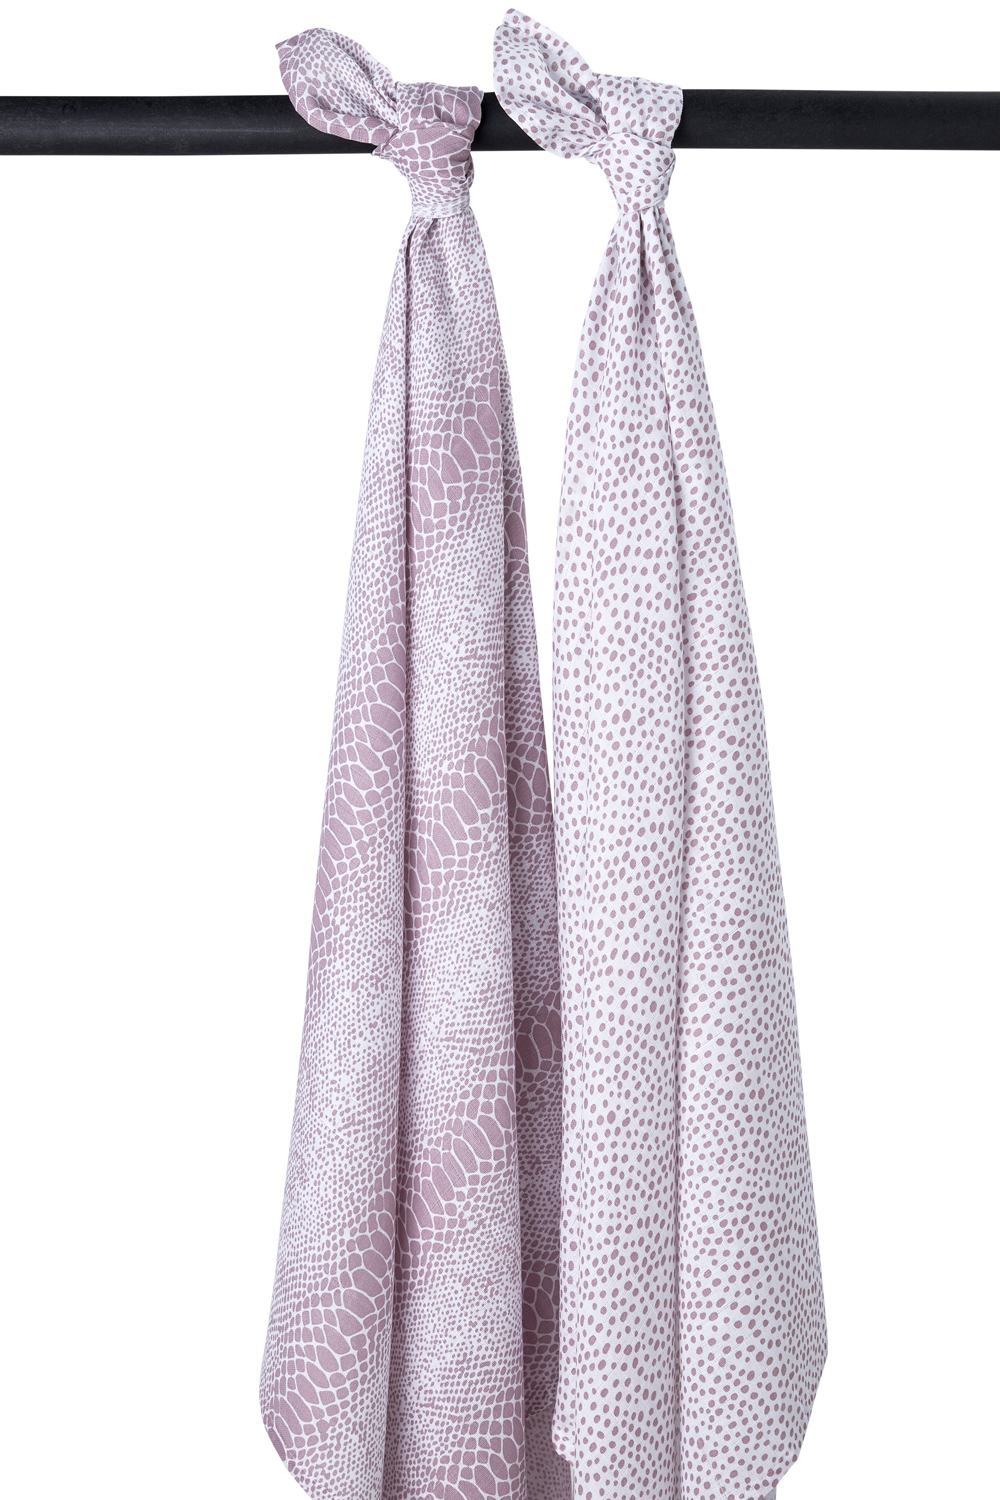 Musselin Swaddles 2-Pack Snake/Cheetah - Lilac - 120x120cm